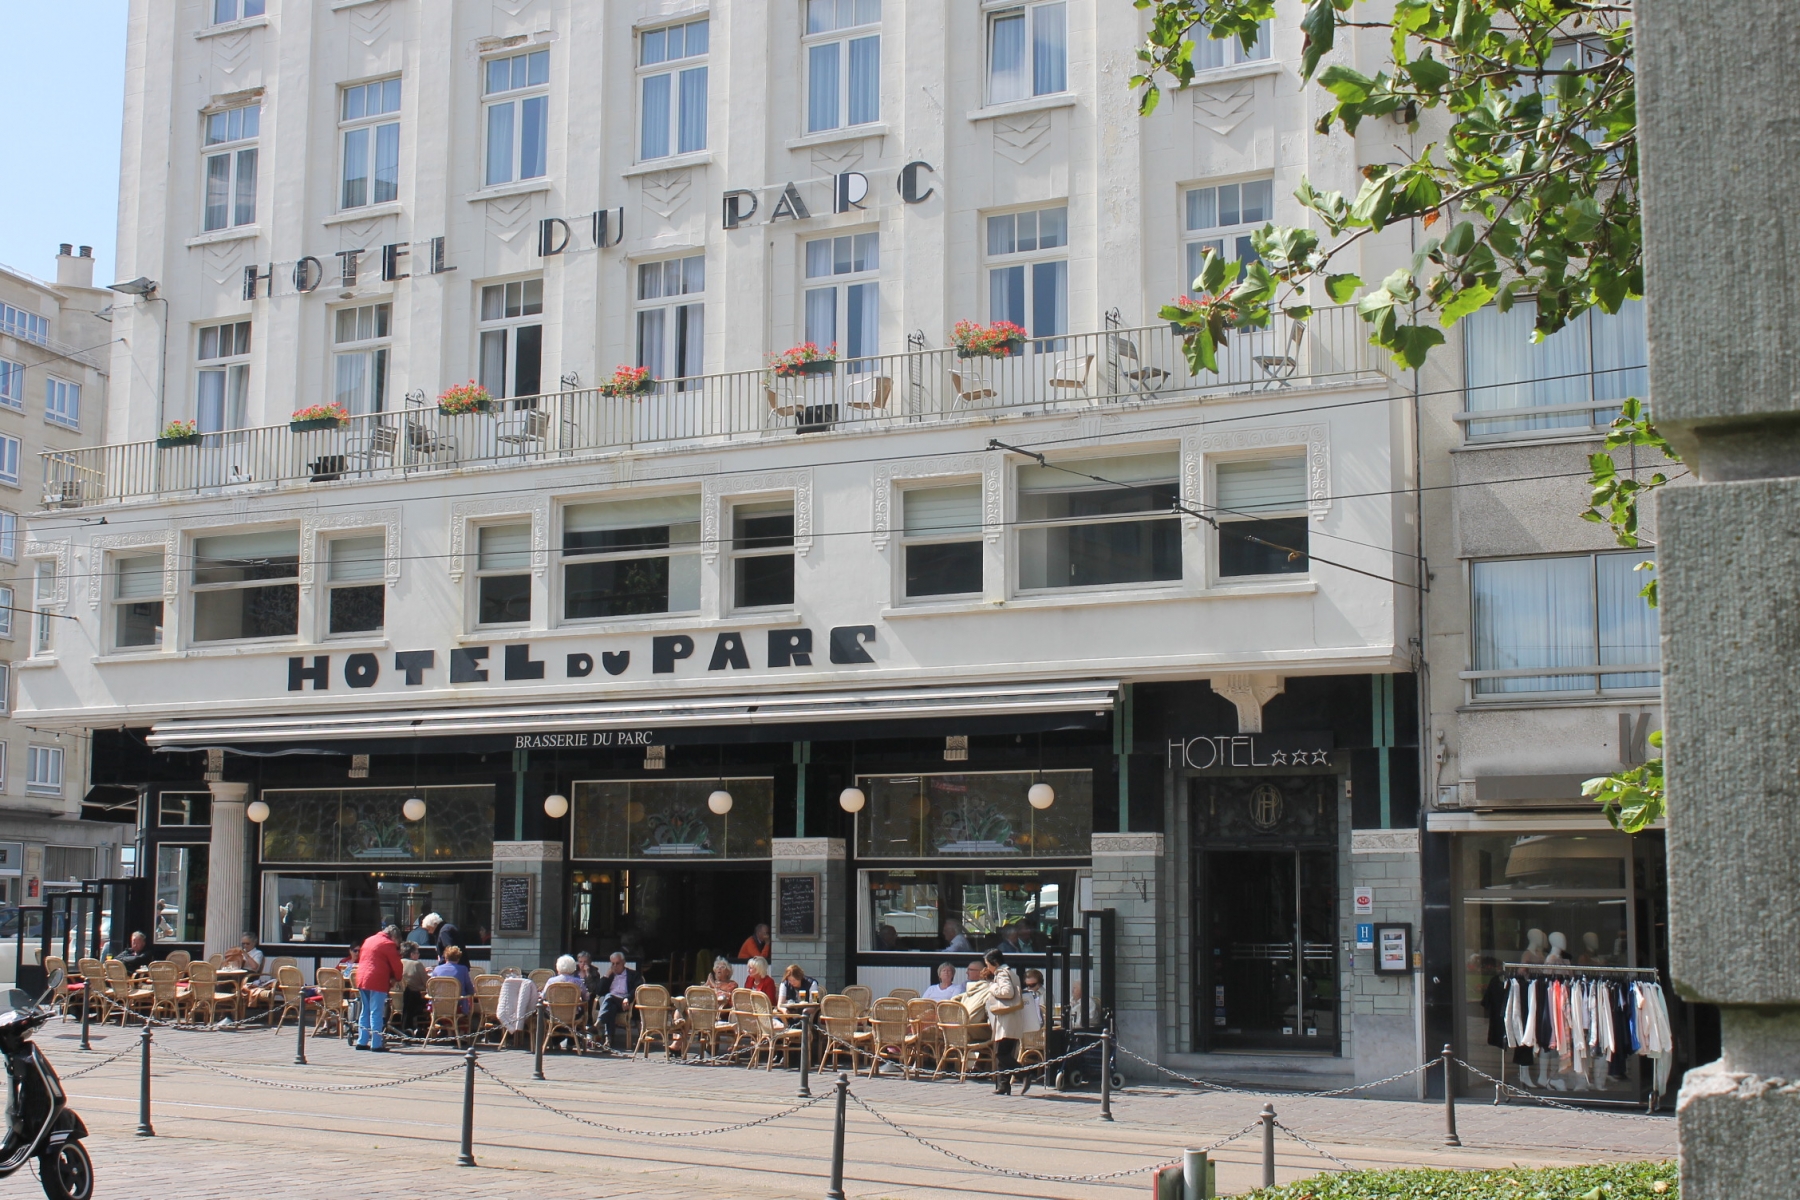 Hotel Du Parc Oostende <br/>82.00 ew <br/> <a href='http://vakantieoplossing.nl/outpage/?id=e026d33f270b3583c560a0ef9c425d6d' target='_blank'>View Details</a>